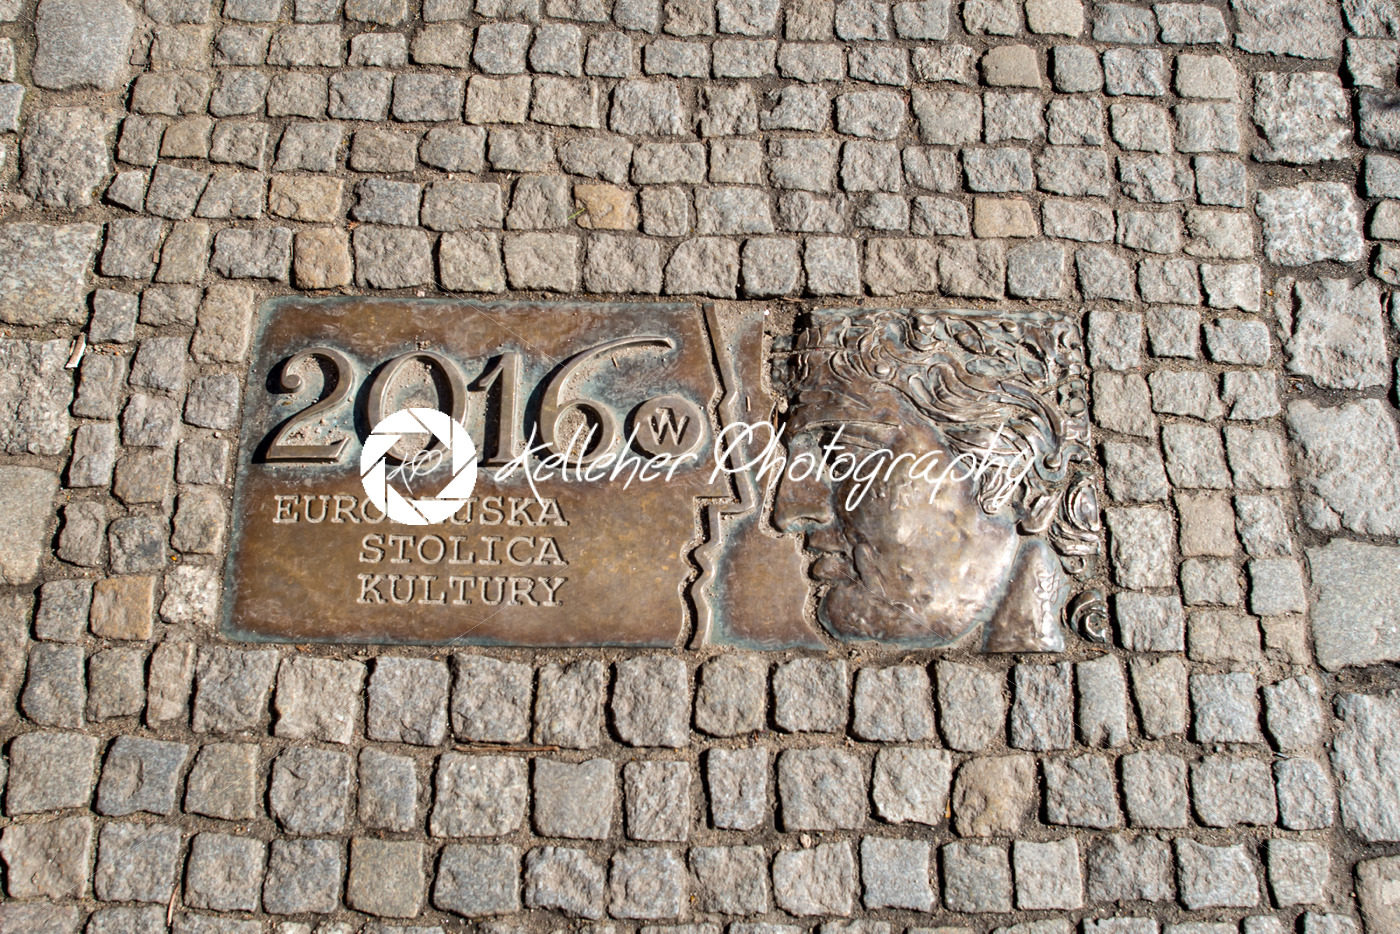 Wroclaw, Poland – March 9, 2018: One of the metal plaques on Wroclaw’s Sidewalk Timeline commemorating influential dates - Kelleher Photography Store